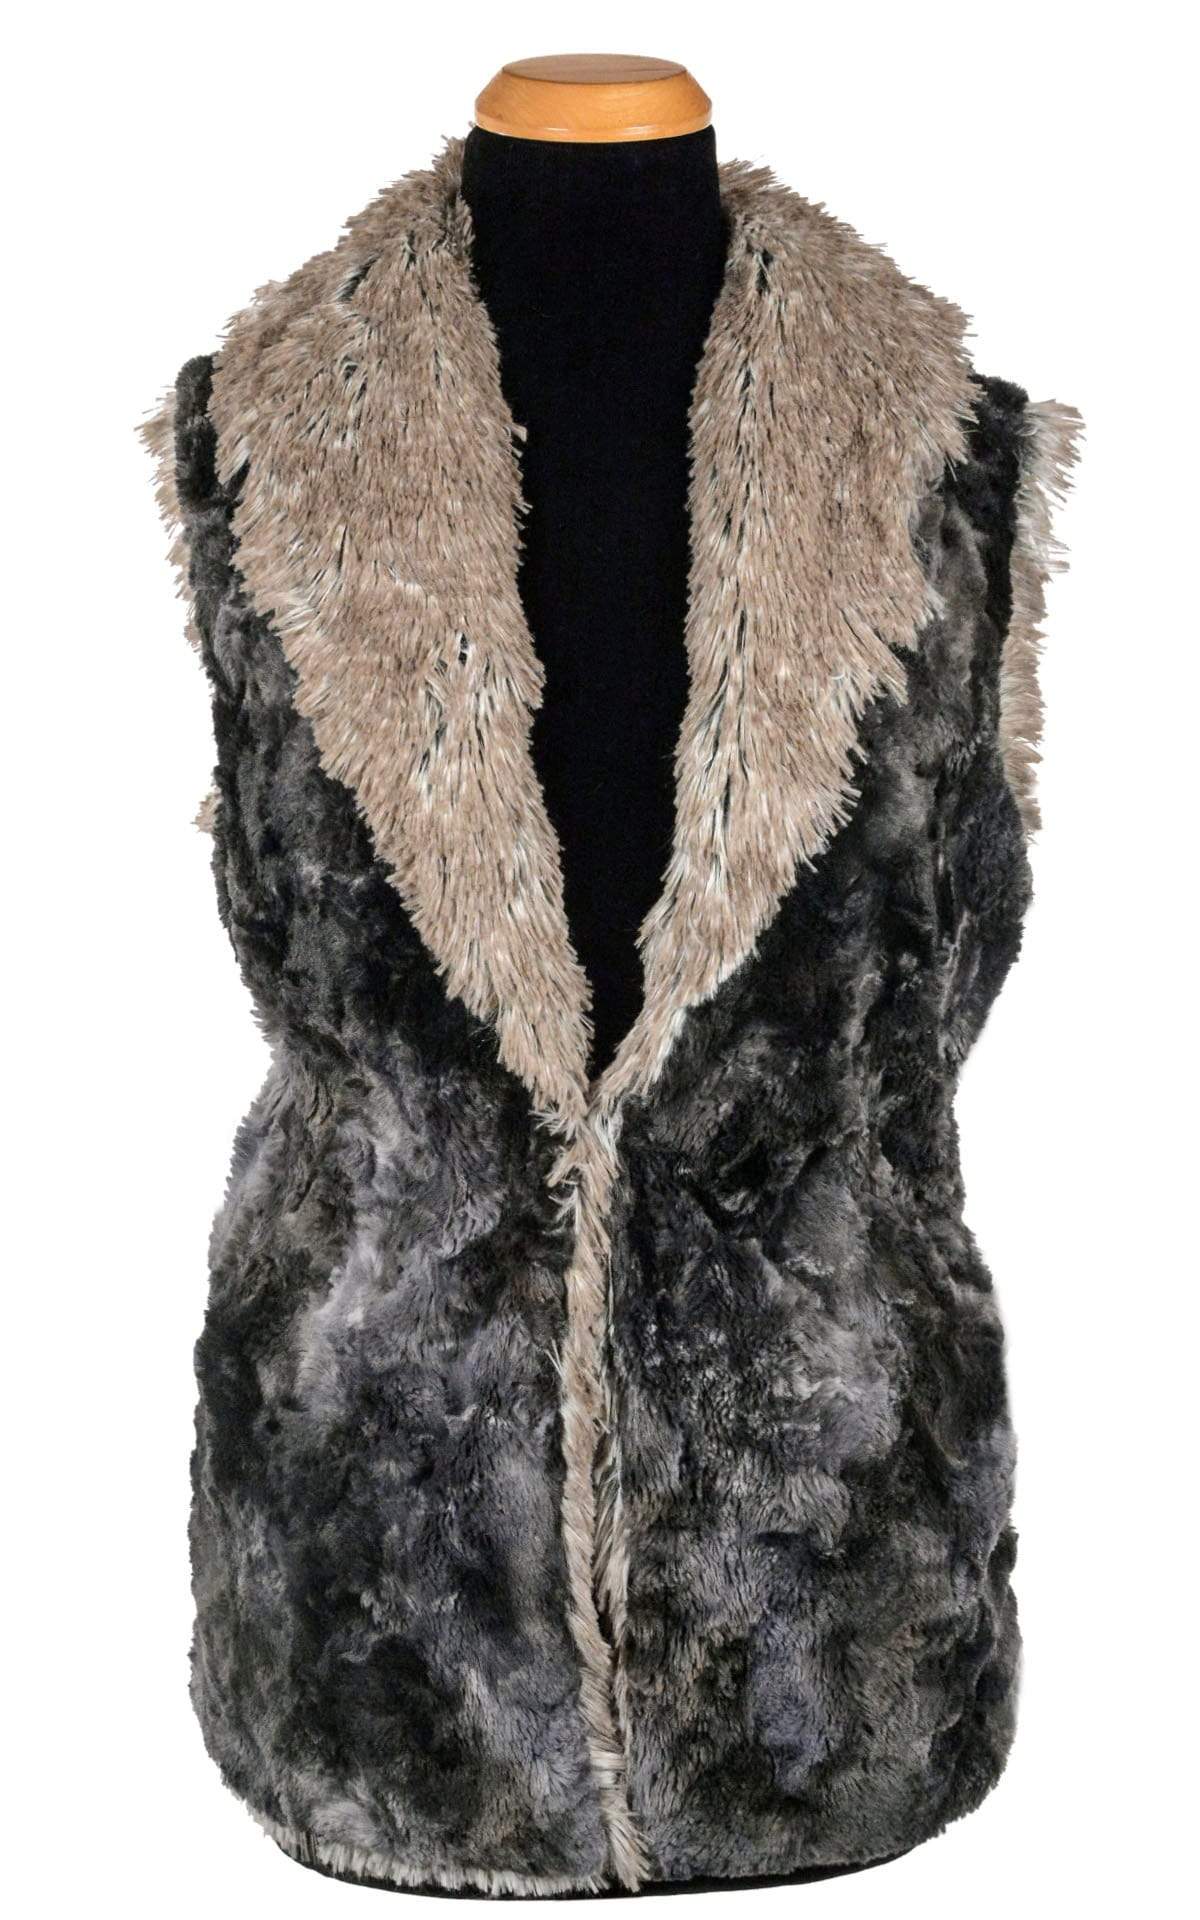 Vest in Highland Skye Faux Fur lined Arctic Fox Handmade By Pandemonium Seattle USA